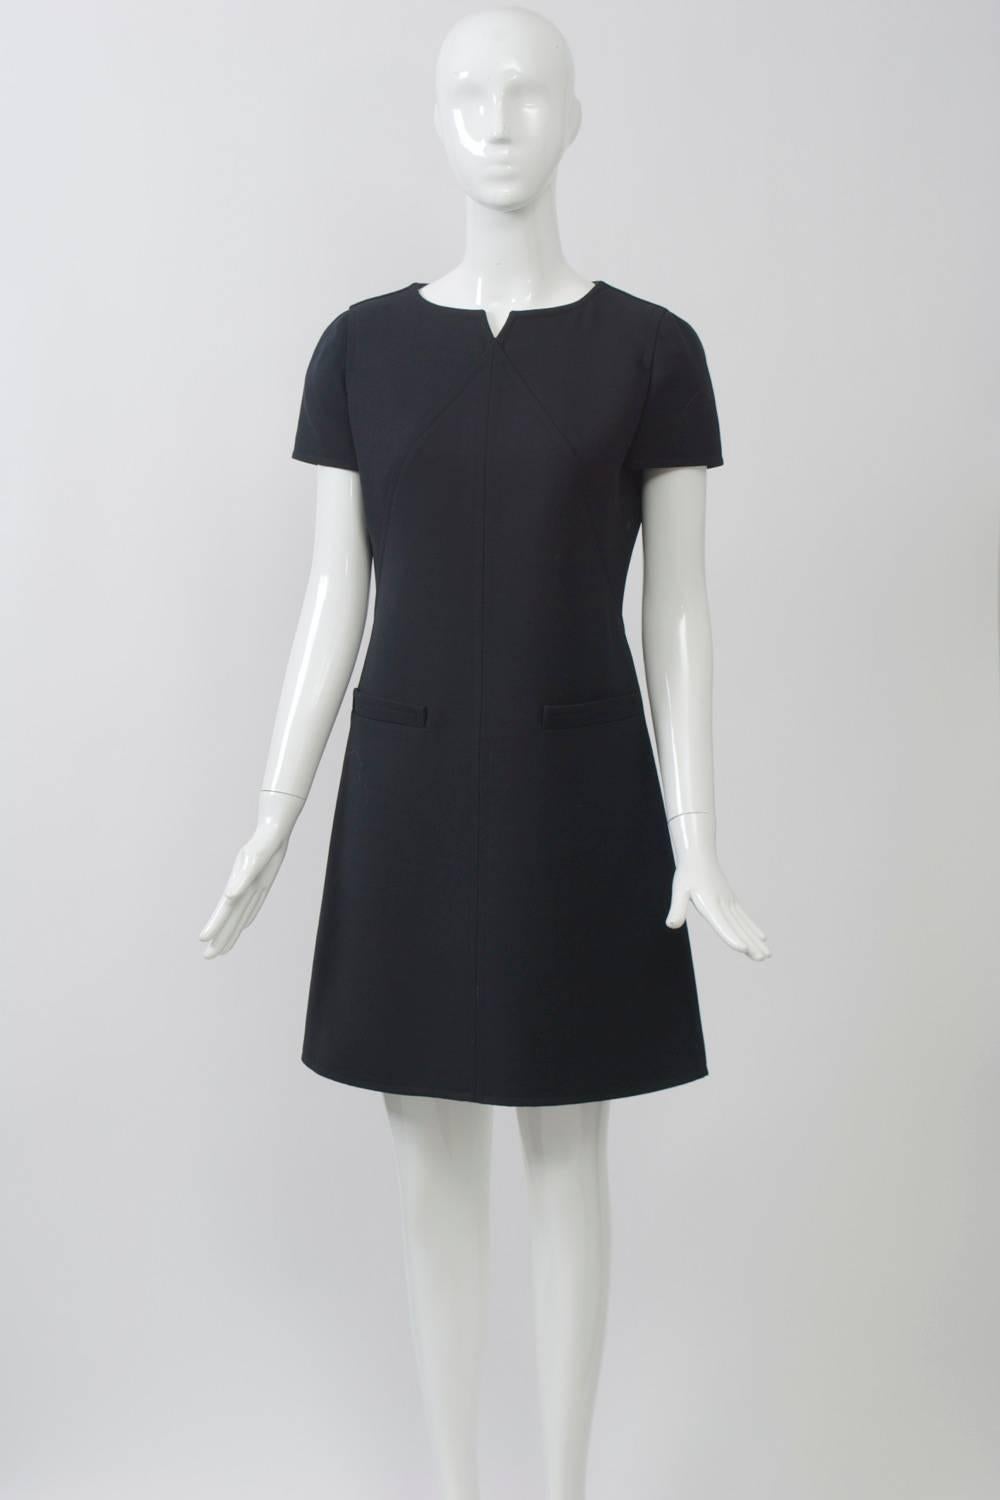 Perfect little black dress in wool from André Courrèges features welted diagonal seaming that forms an inverted V on the bodice, resulting in a notched-v at the center of the round neckline. Other features include faux pockets at the hips and a